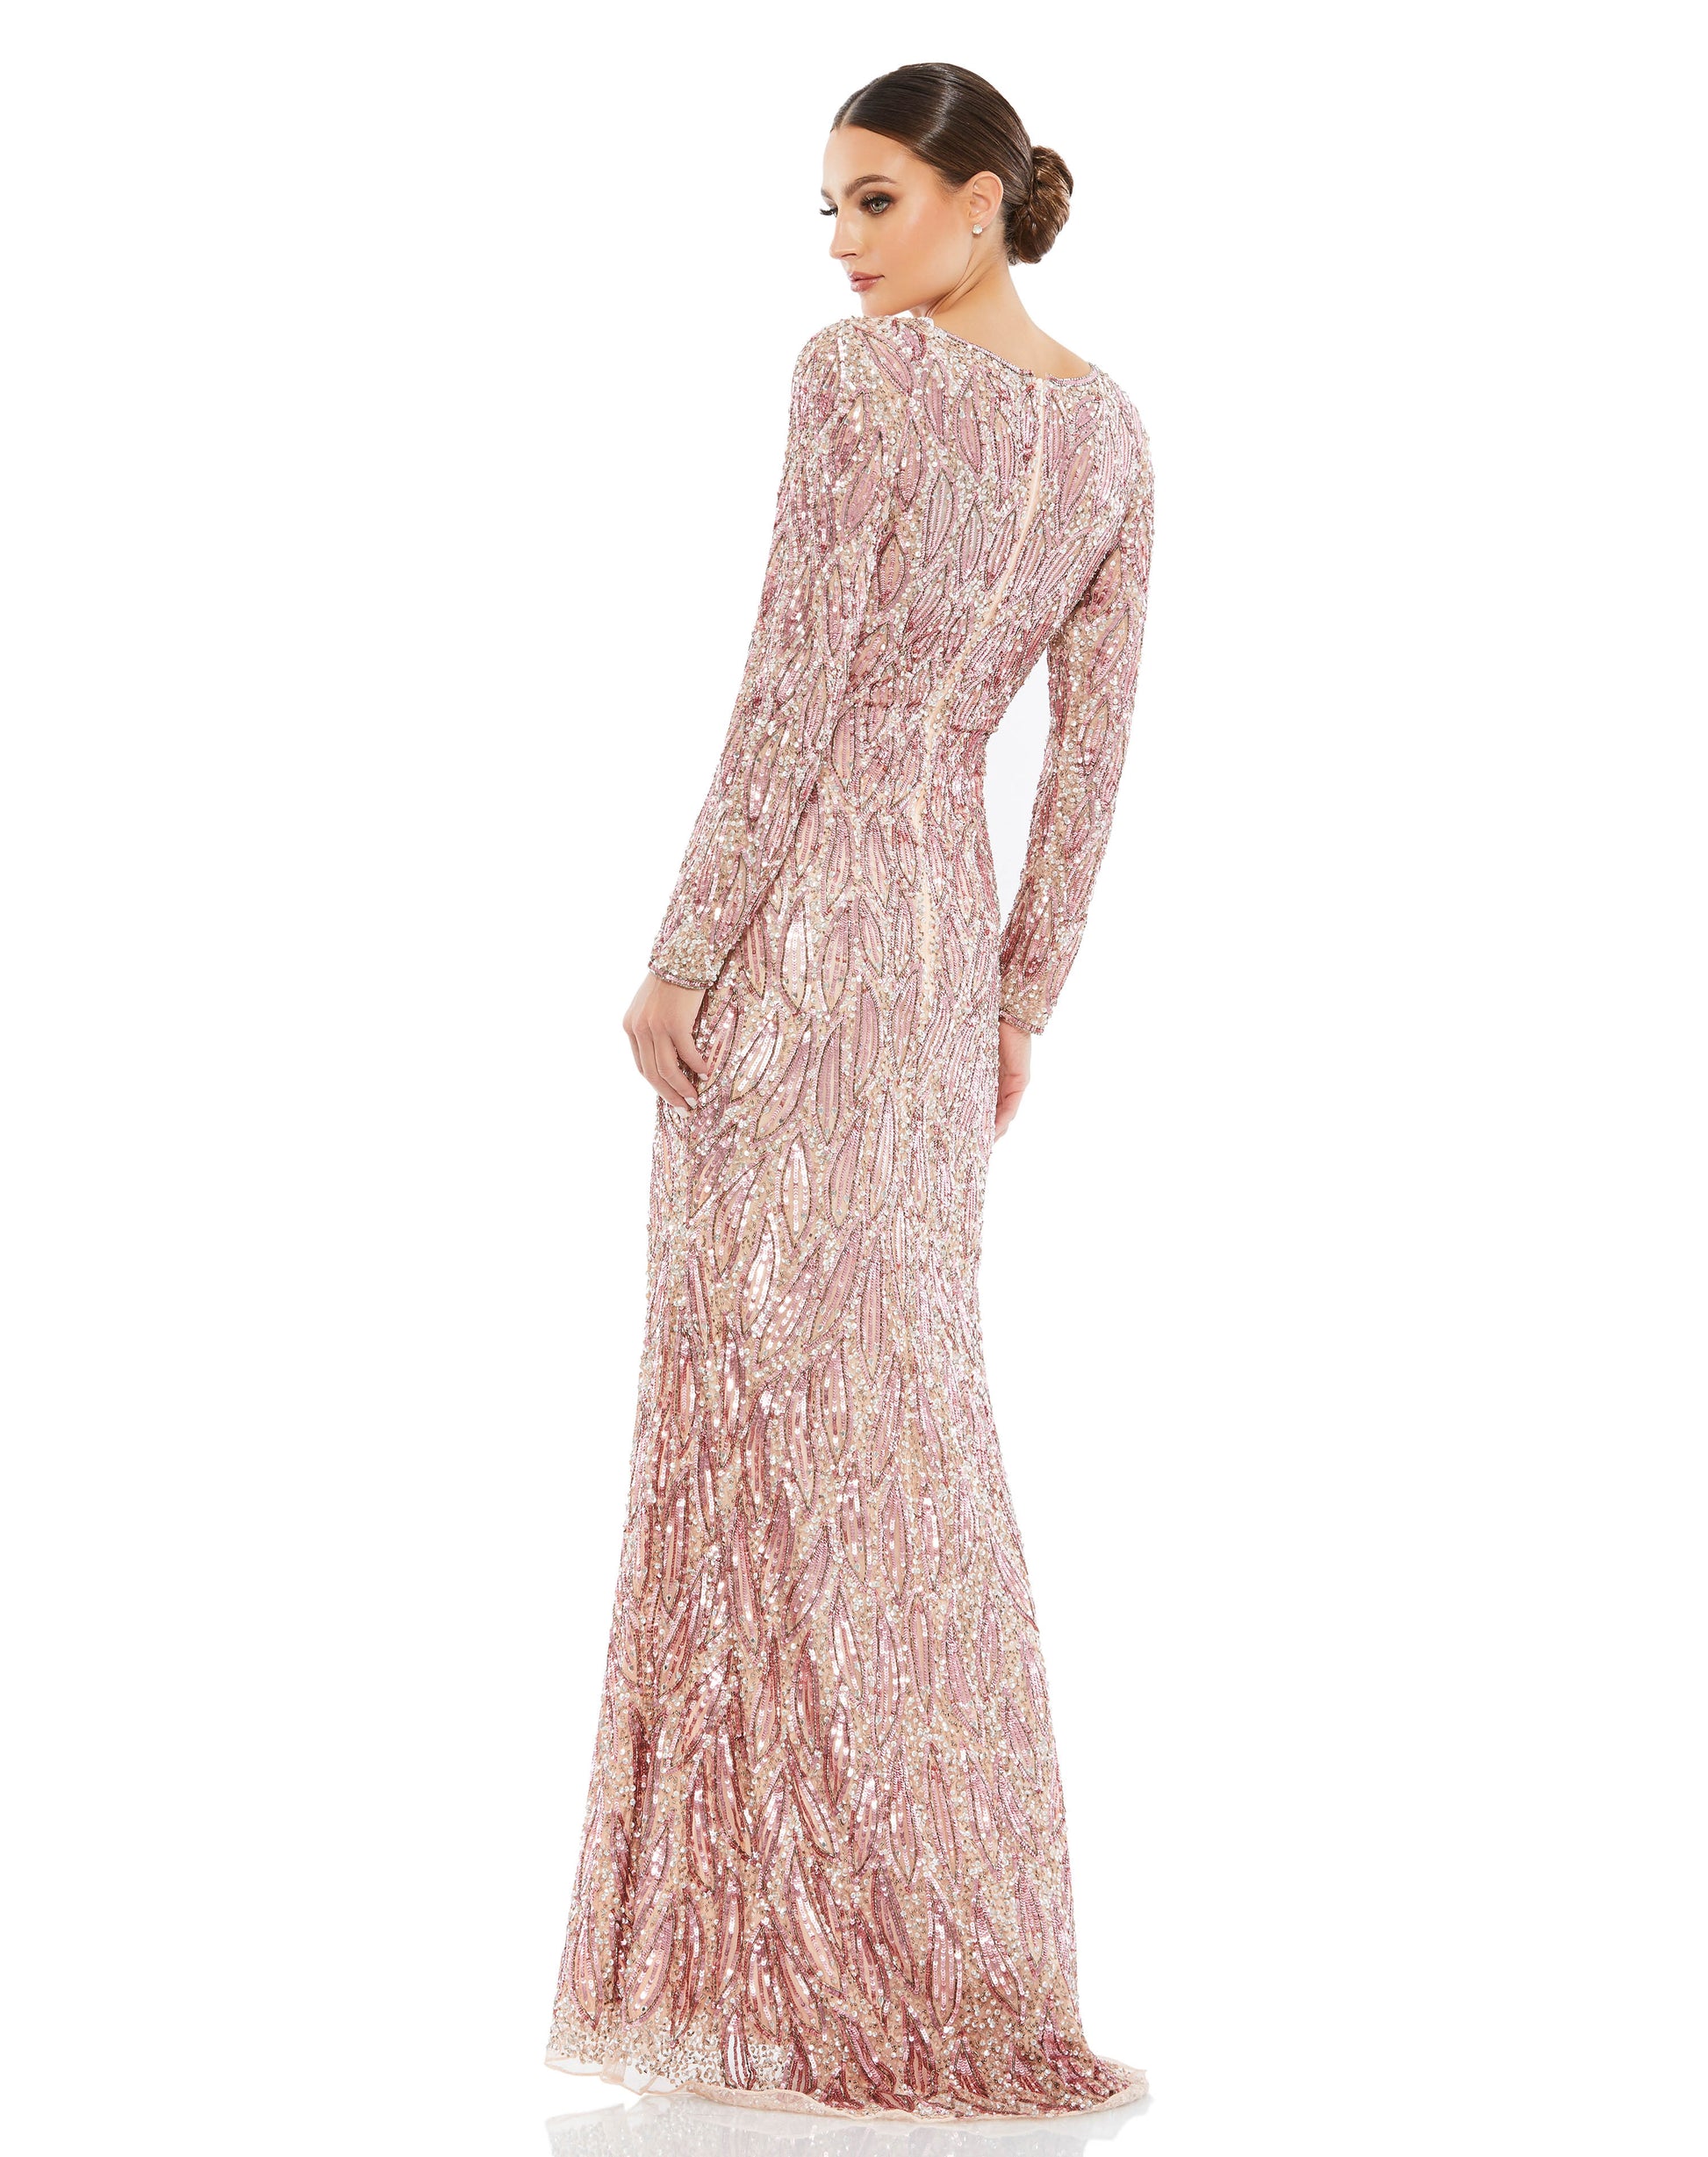 Fully Sequined long sleeve evening gown with hand-beaded patterns and a plunging v-neck. Mac Duggal Fully lined Back Zipper 100% Polyester Long Sleeve Full Length Illusion Plunging V-Neck Style #4578